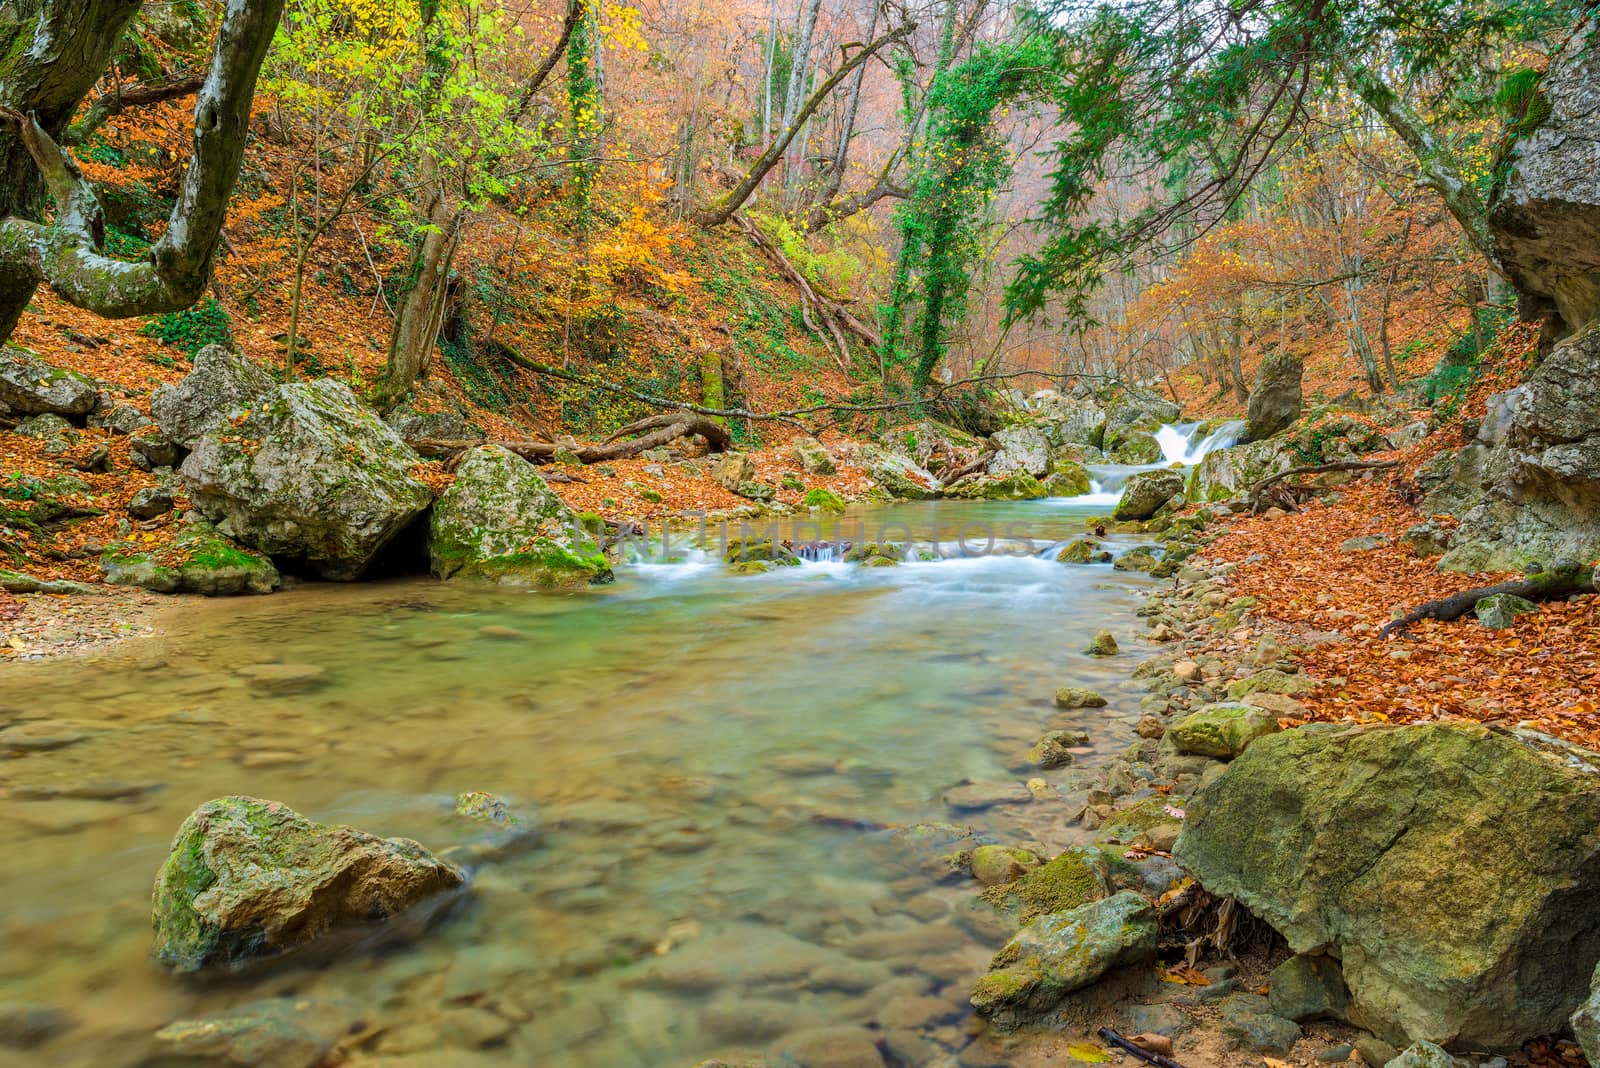 Beautiful autumn landscape, a river flowing into a gorge in the mountains and fallen leaves of trees